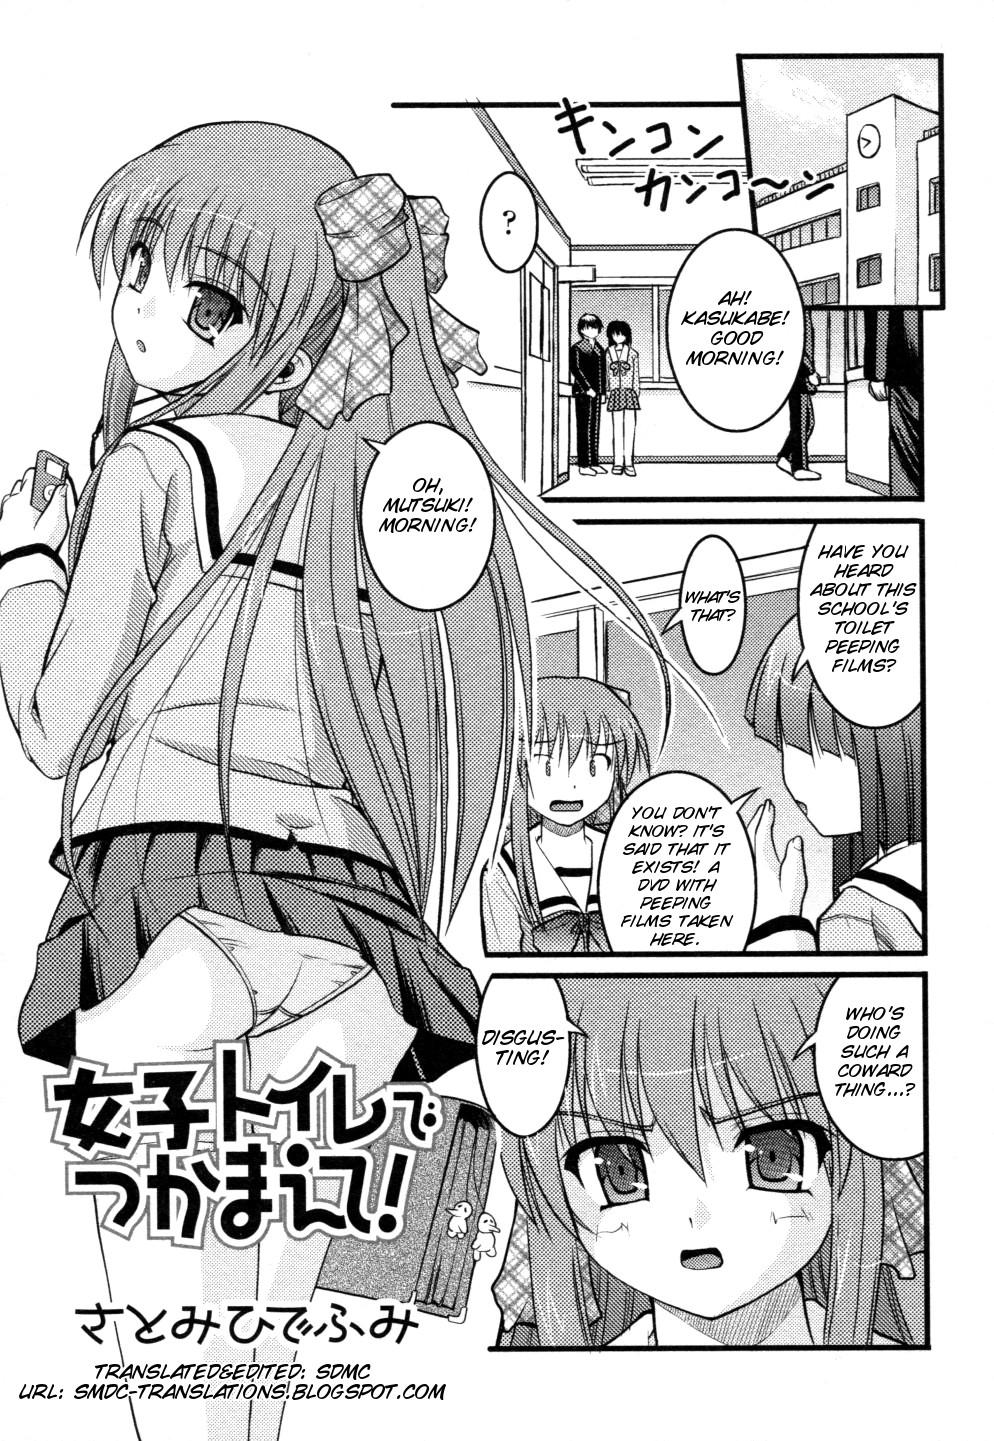 Double Penetration [Anthology Nozoite wa Ikenai 3](do not peep 3) ep4 [Satomi Hidefumi] - The Catcher in The Girl's Room(Eng) Hairy Sexy - Page 3